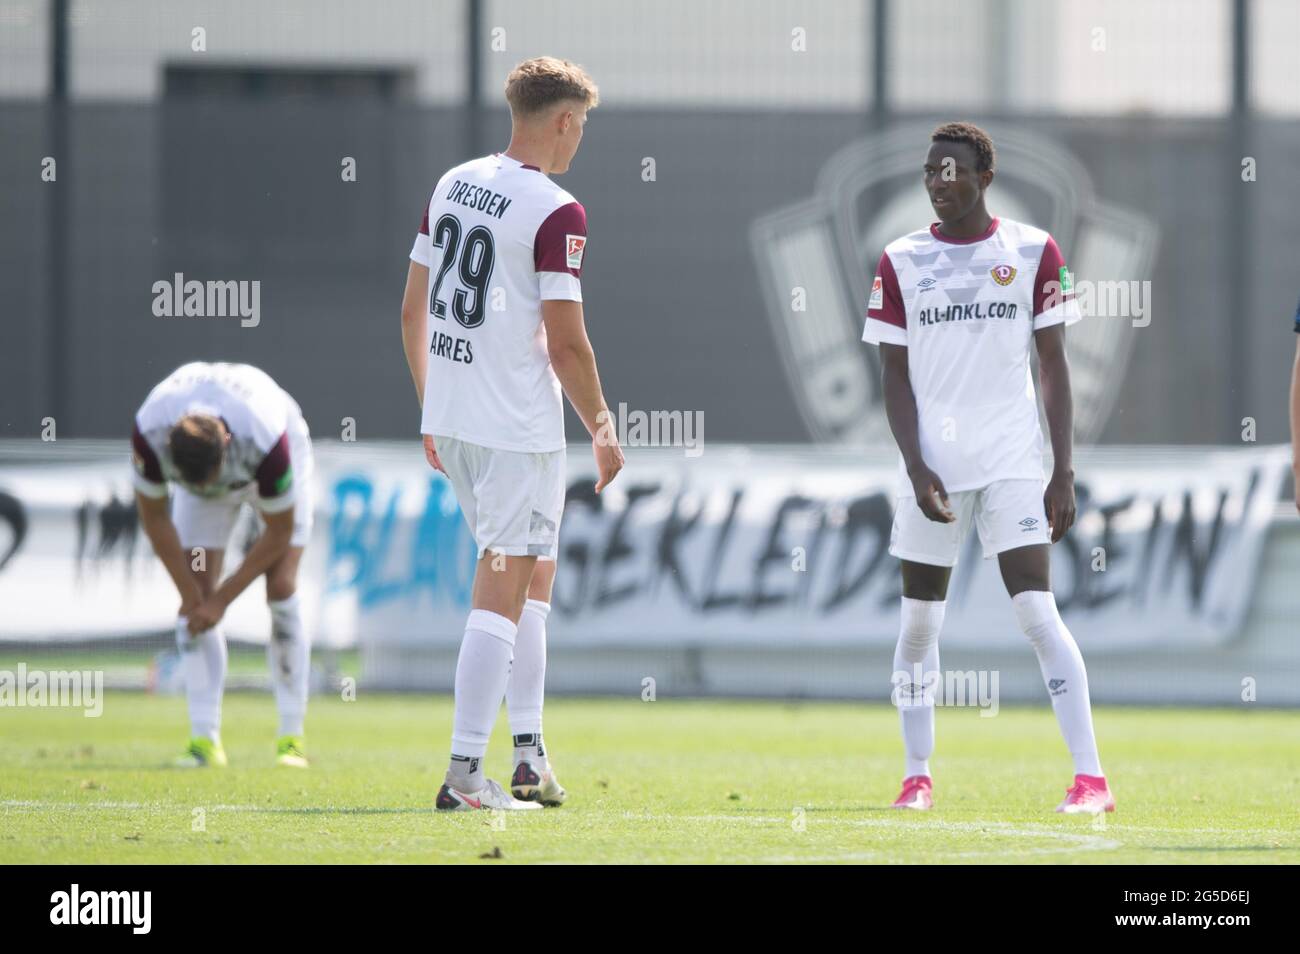 Dresden, Germany. 26th June, 2021. Football: Test match, SG Dynamo - Hertha BSC II, AOK PLUS Walter-Fritzsch-Akademie. Dynamo's Meissa Diop (r) and Dynamo's Phil Harres (m) stand on the pitch during the match. Credit: Sebastian Kahnert/dpa-Zentralbild/dpa - IMPORTANT NOTE: In accordance with the regulations of the DFL Deutsche Fußball Liga and/or the DFB Deutscher Fußball-Bund, it is prohibited to use or have used photographs taken in the stadium and/or of the match in the form of sequence pictures and/or video-like photo series./dpa/Alamy Live News Stock Photo